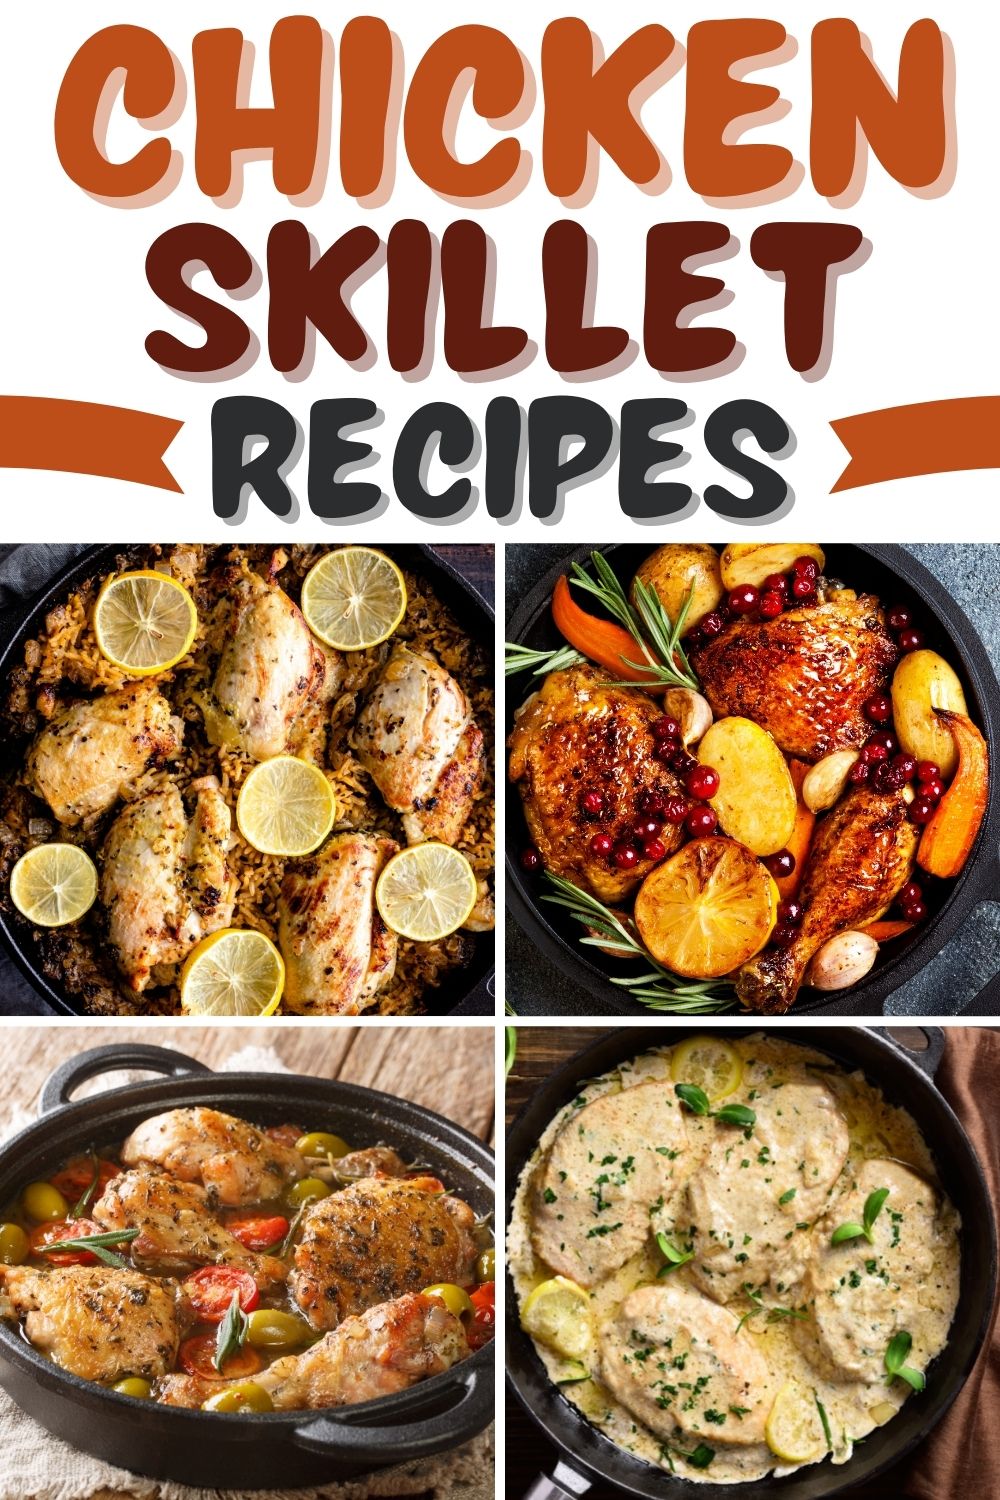 28 Chicken Skillet Recipes for Easy Dinners - Insanely Good